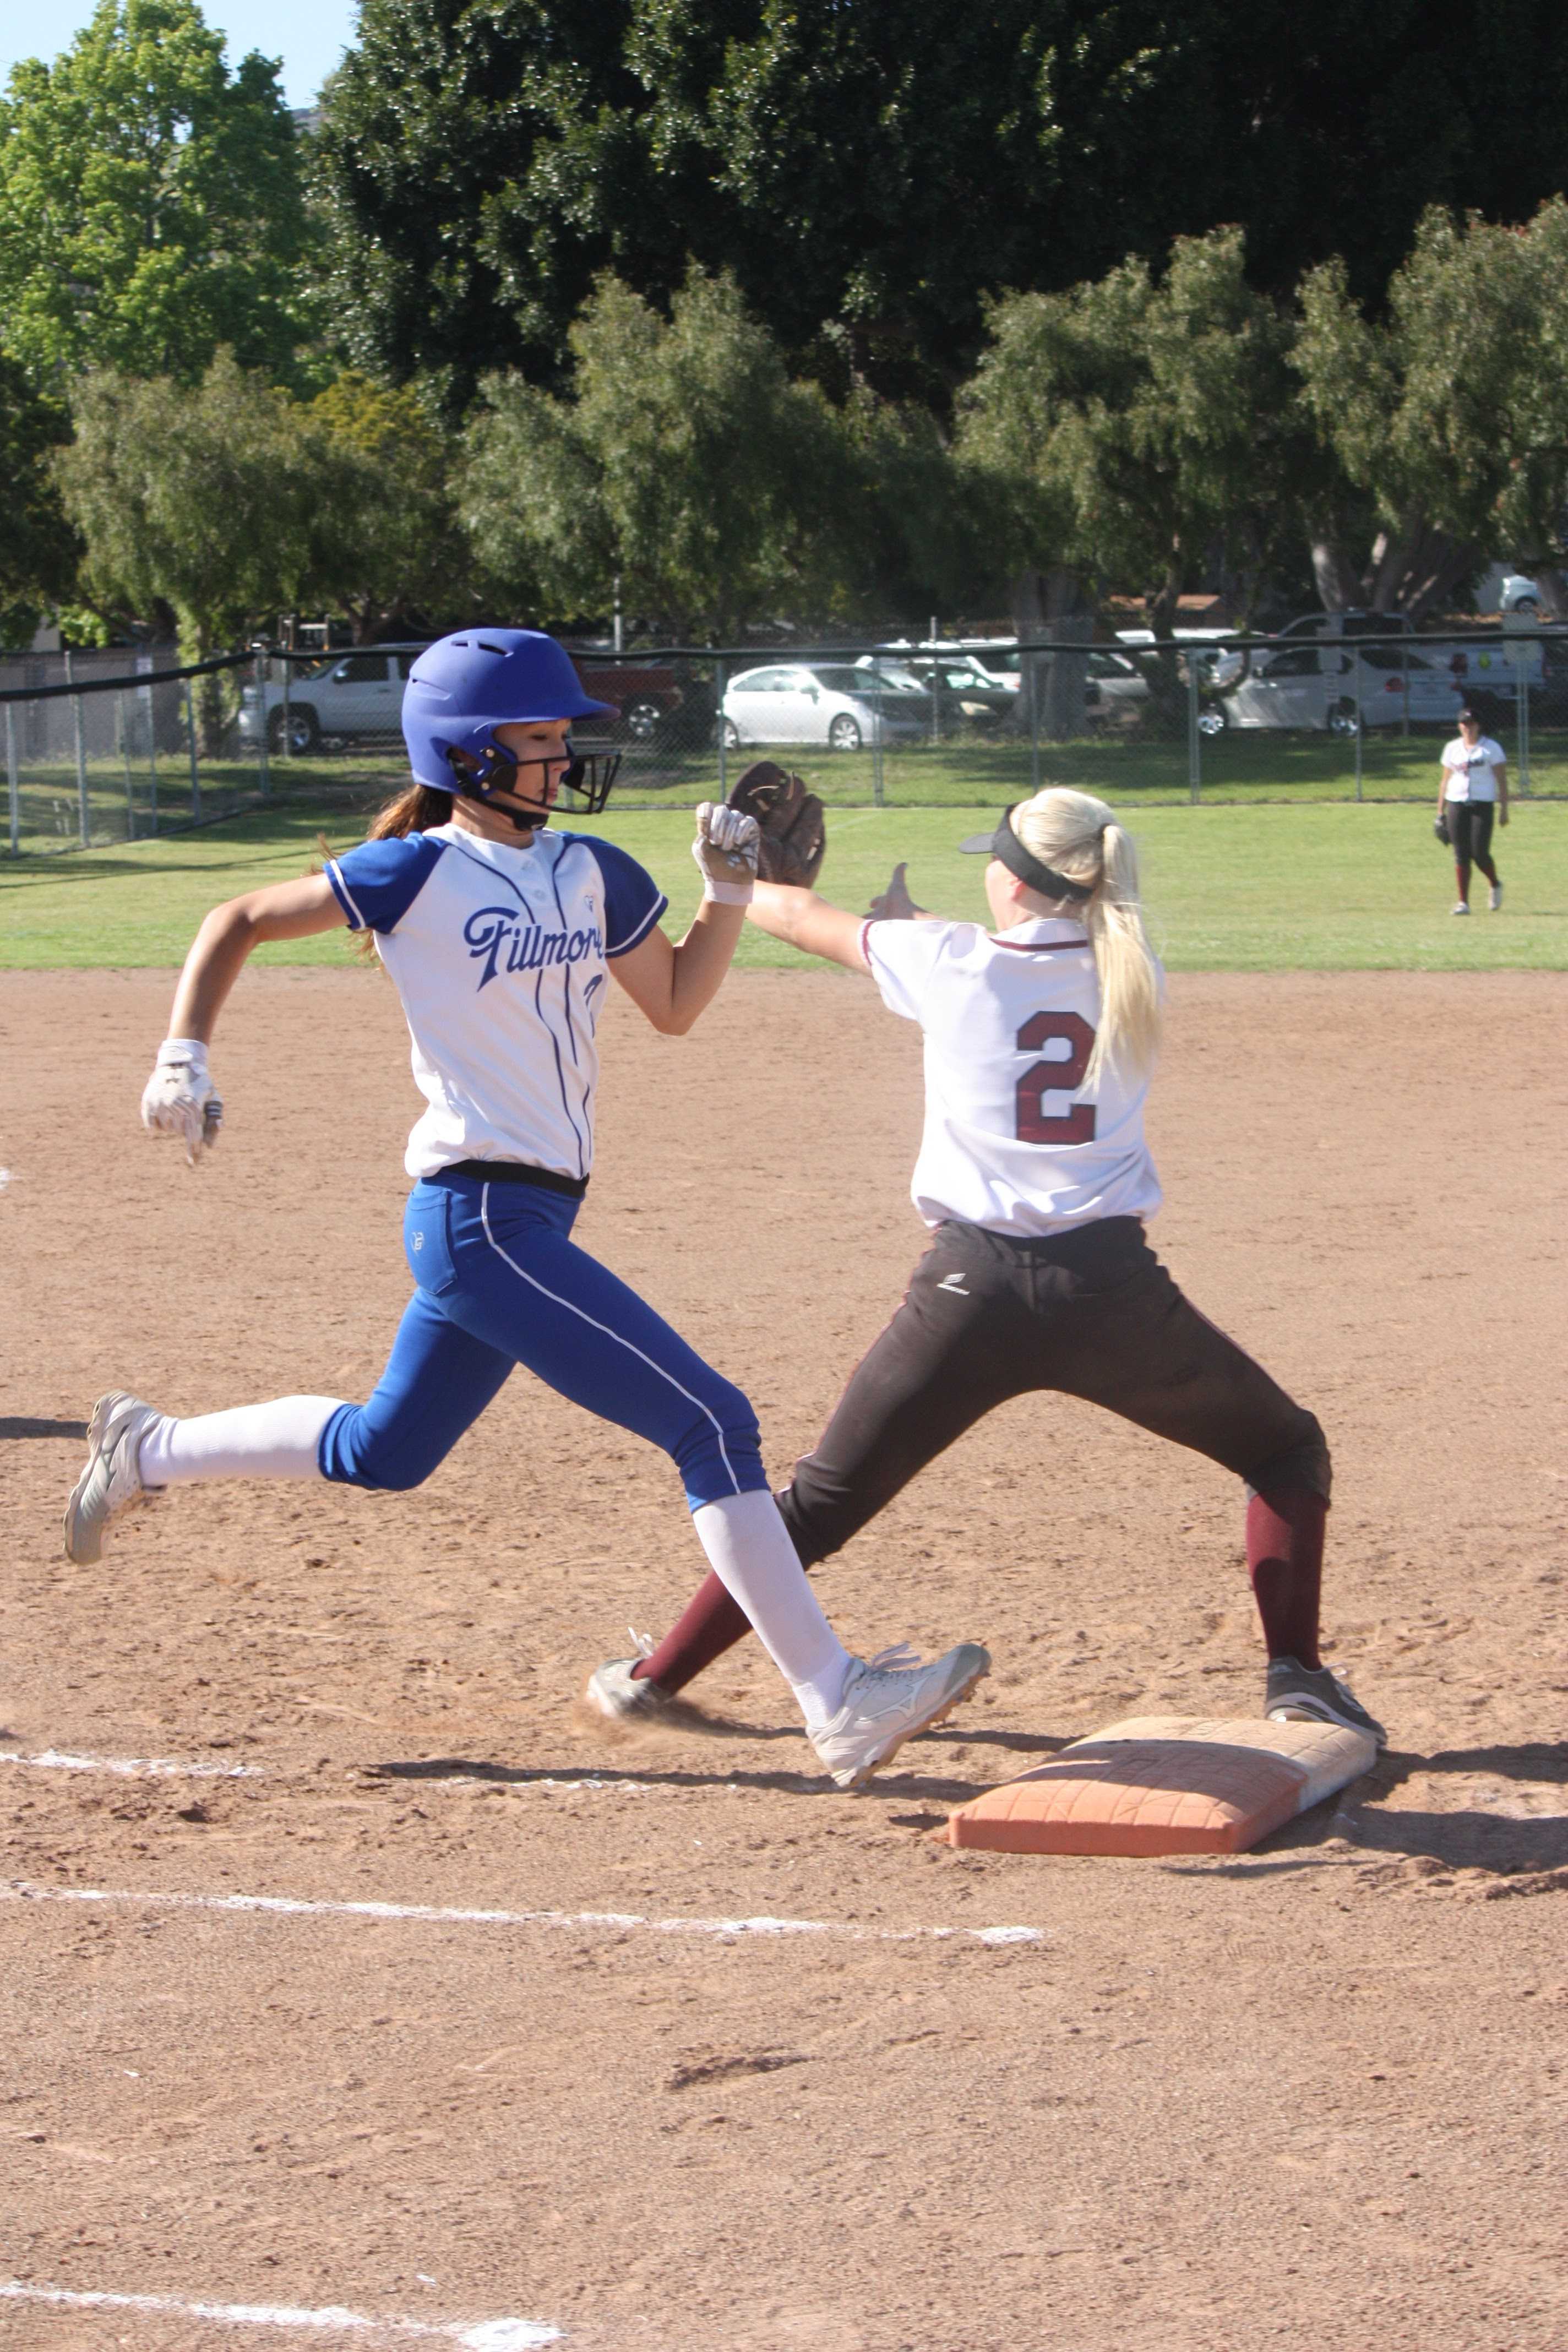 Sophomore Jamie Dietz (2) catches the ball at first base, tagging out Fillmore varsity batter. Credit: Gabrialla Cockerell/ The Foothill Dragon Press